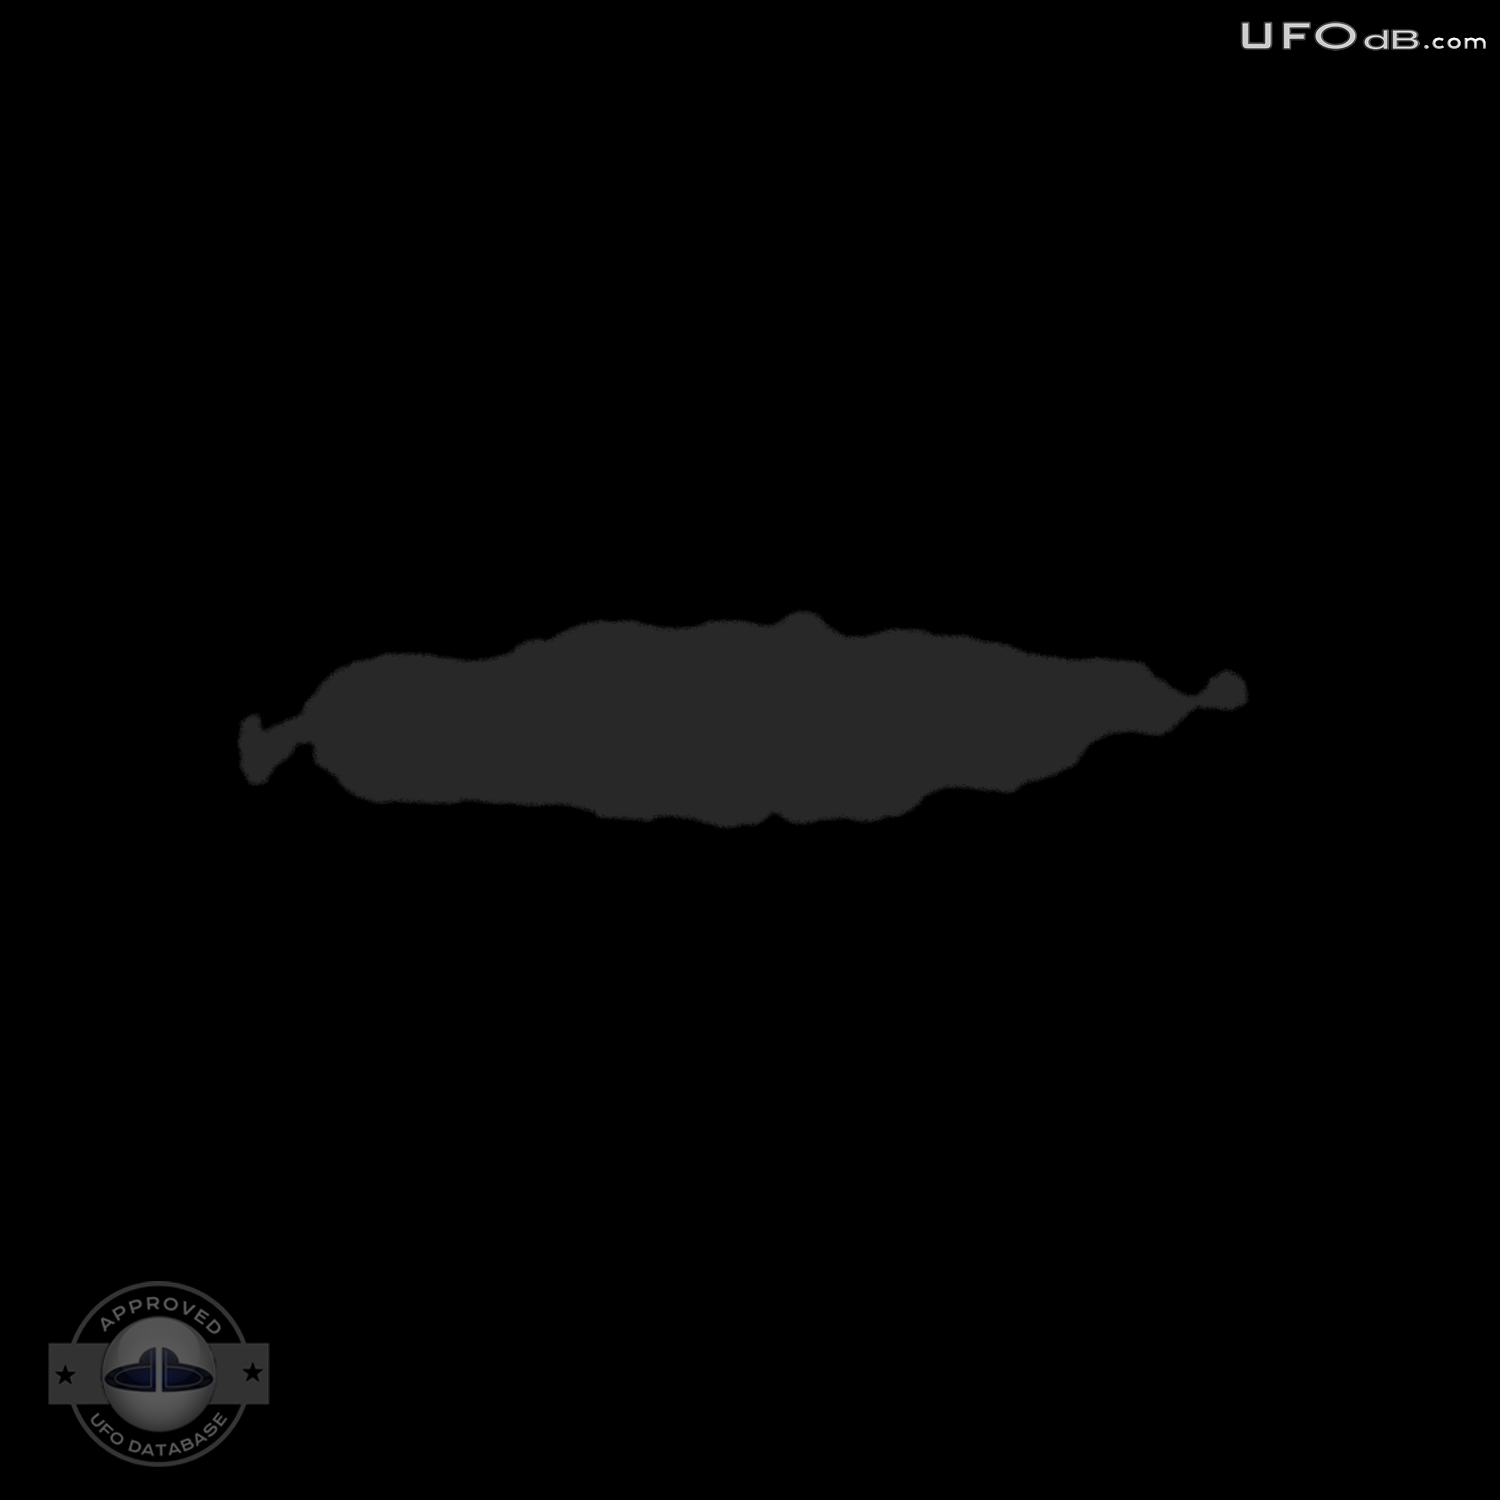 Lake Wosley Fisherman get a fast UFO on picture | Ontario, Canada 2011 UFO Picture #276-6